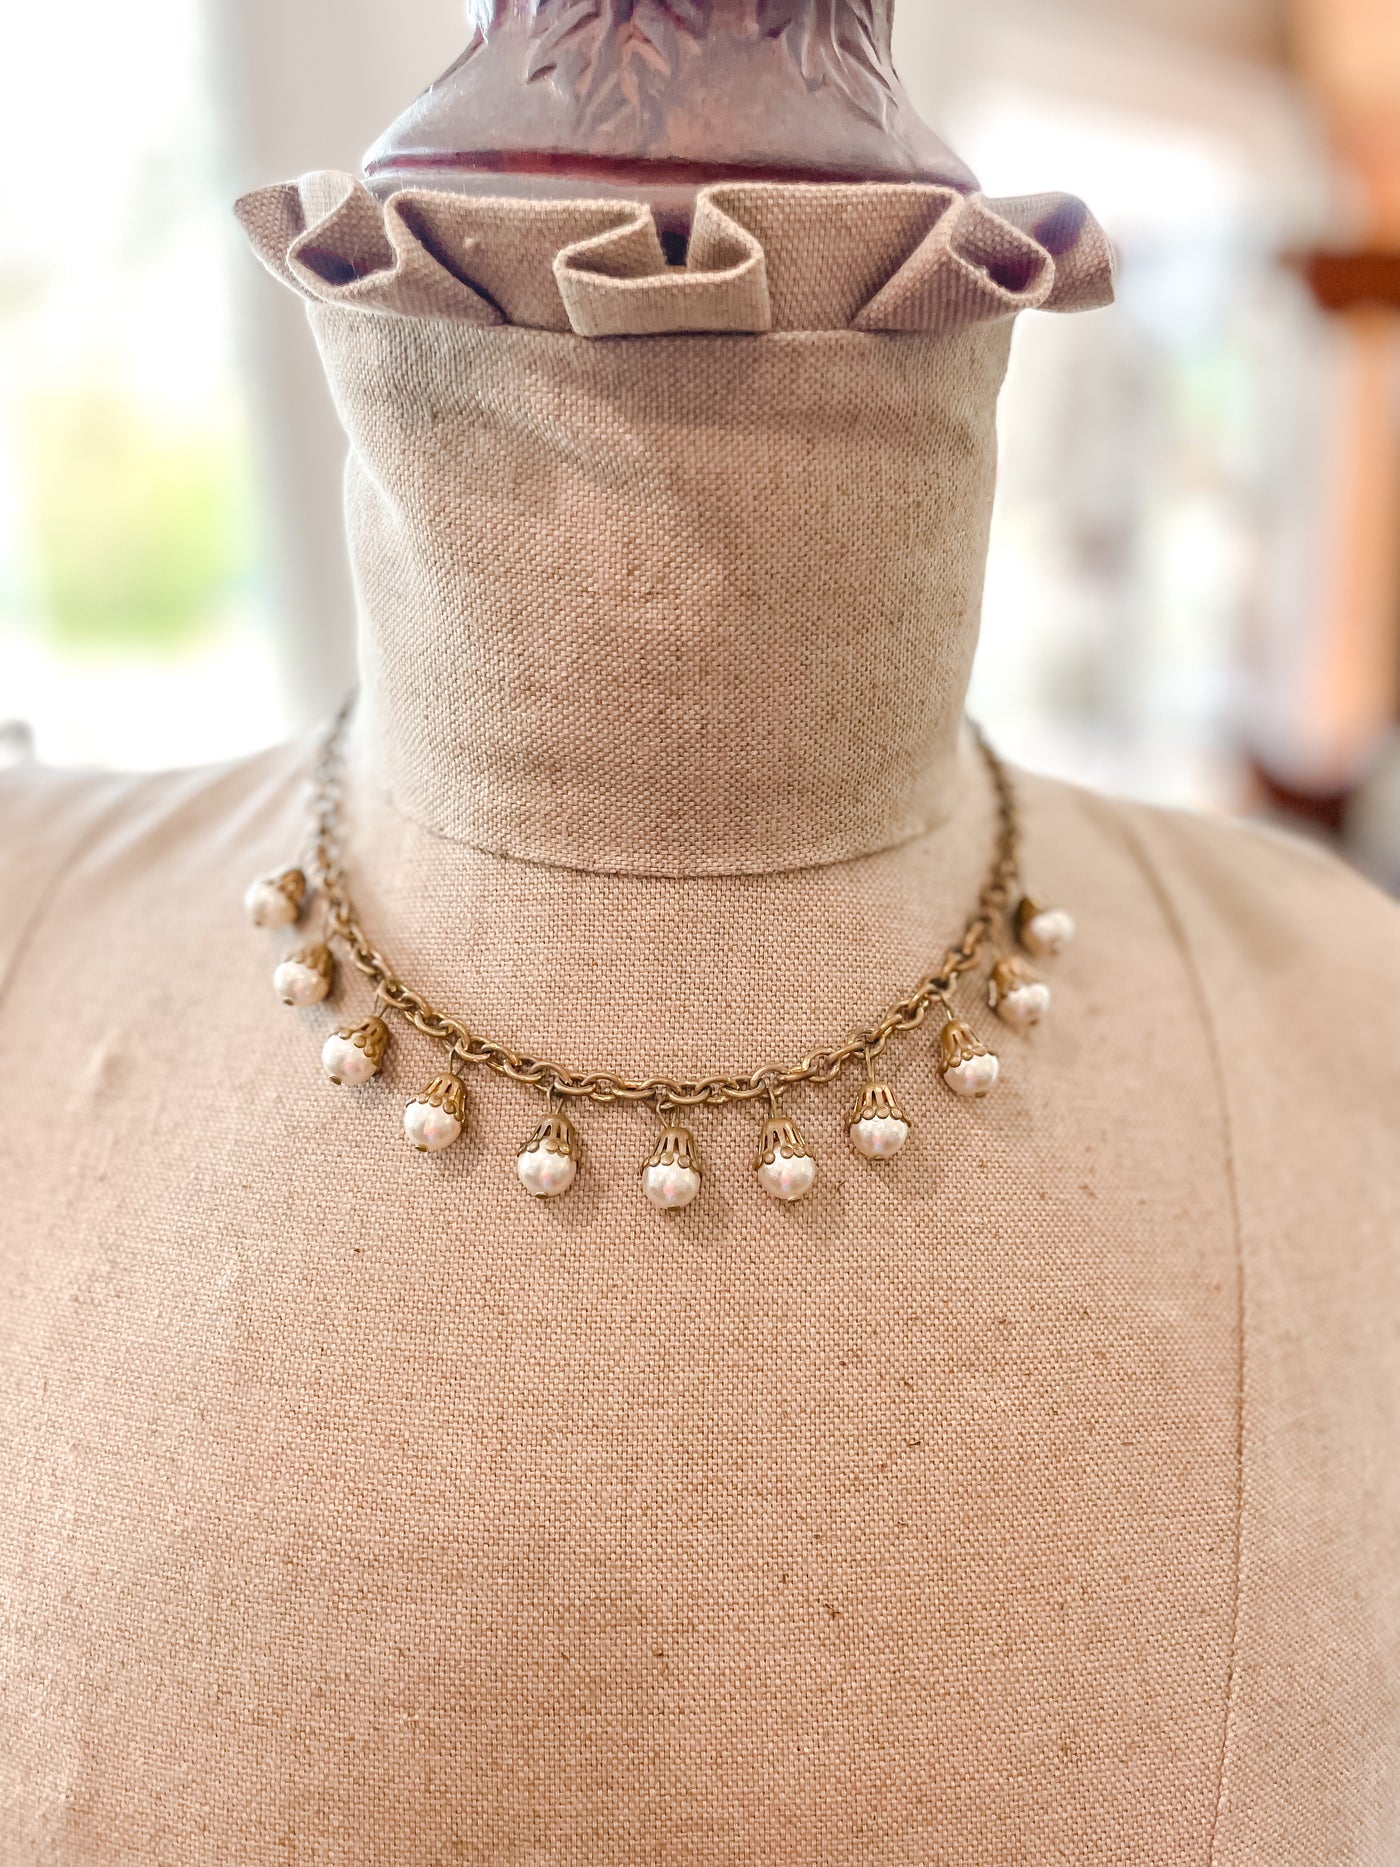 Vintage Gold Chain with Pearl Drops